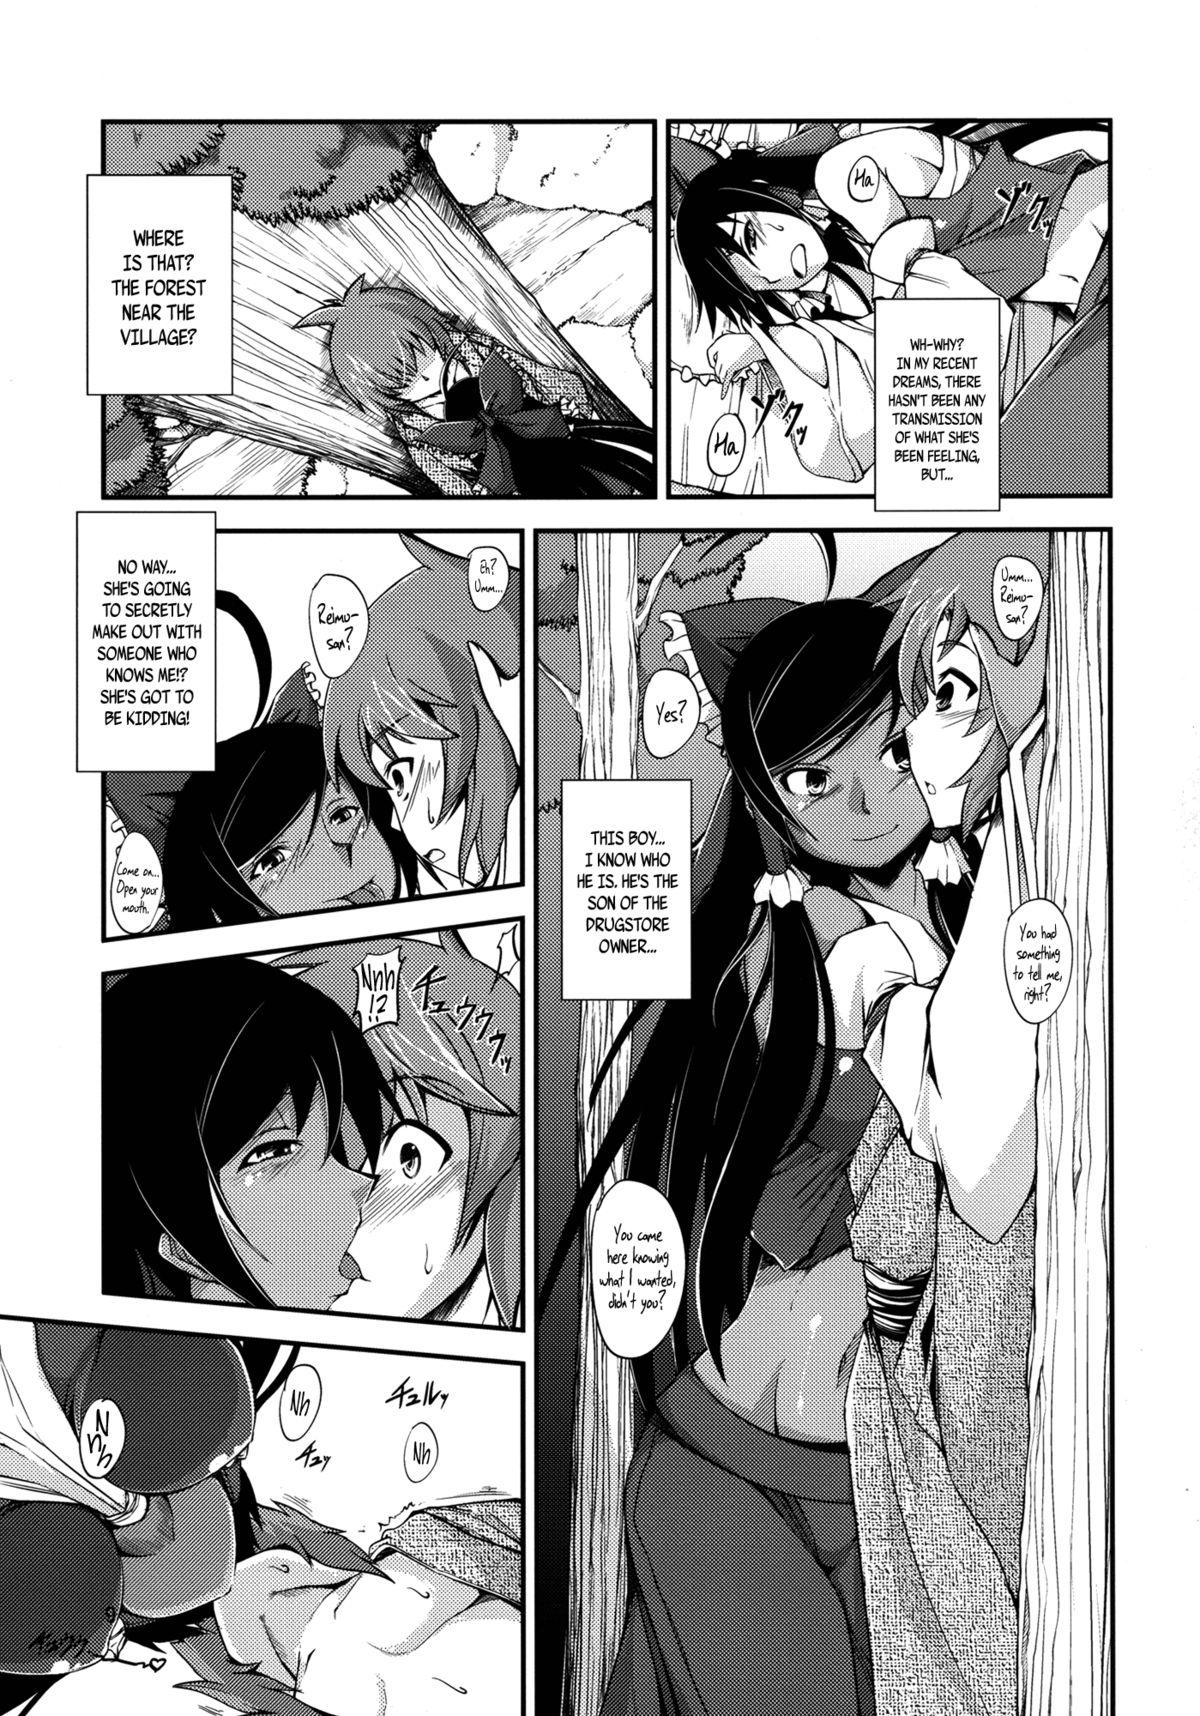 Clothed (Reitaisai 10) [JUNK × JUNK (kojou)] Kuro Miko no Hen ~Sono Ni~ | The Incident of the Black Shrine Maiden ~Part 2~ (Touhou Project) [English] {Afro} - Touhou project Penis - Page 9